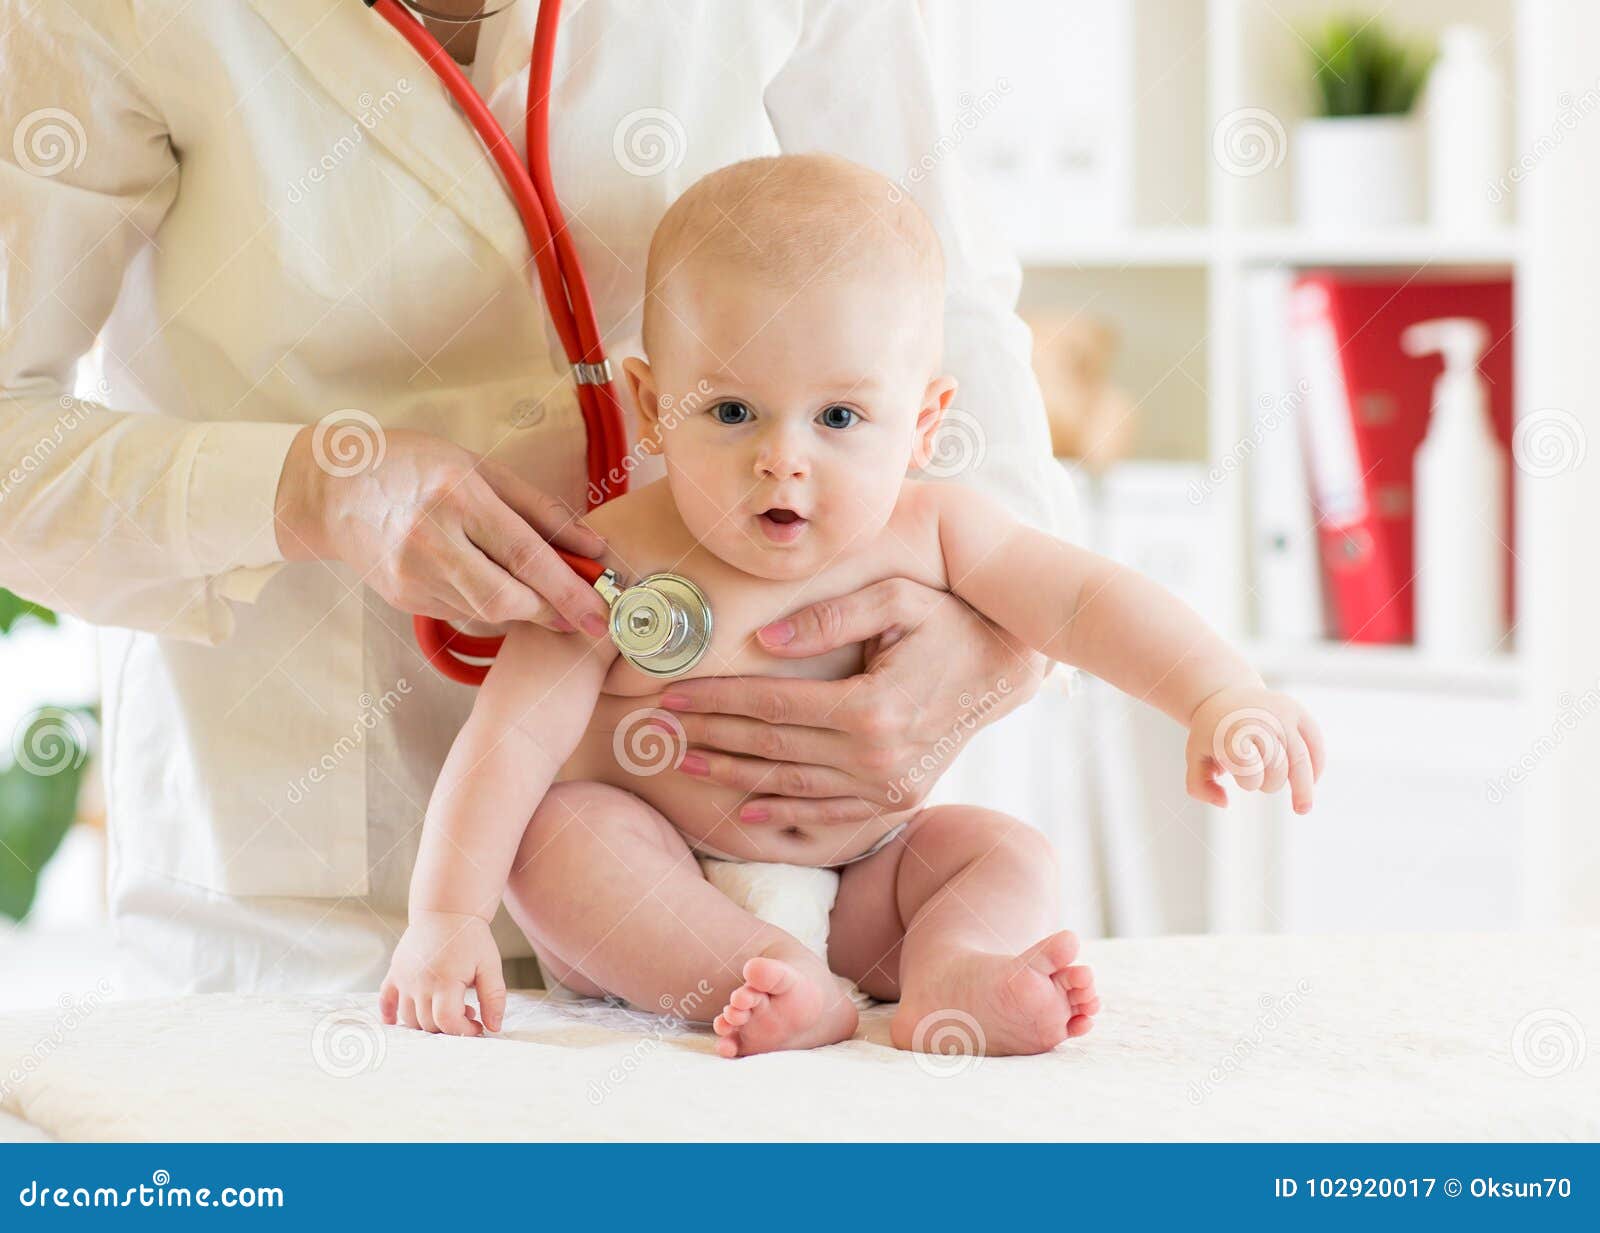 doctor pediatric examining little baby in clinic. baby health concept